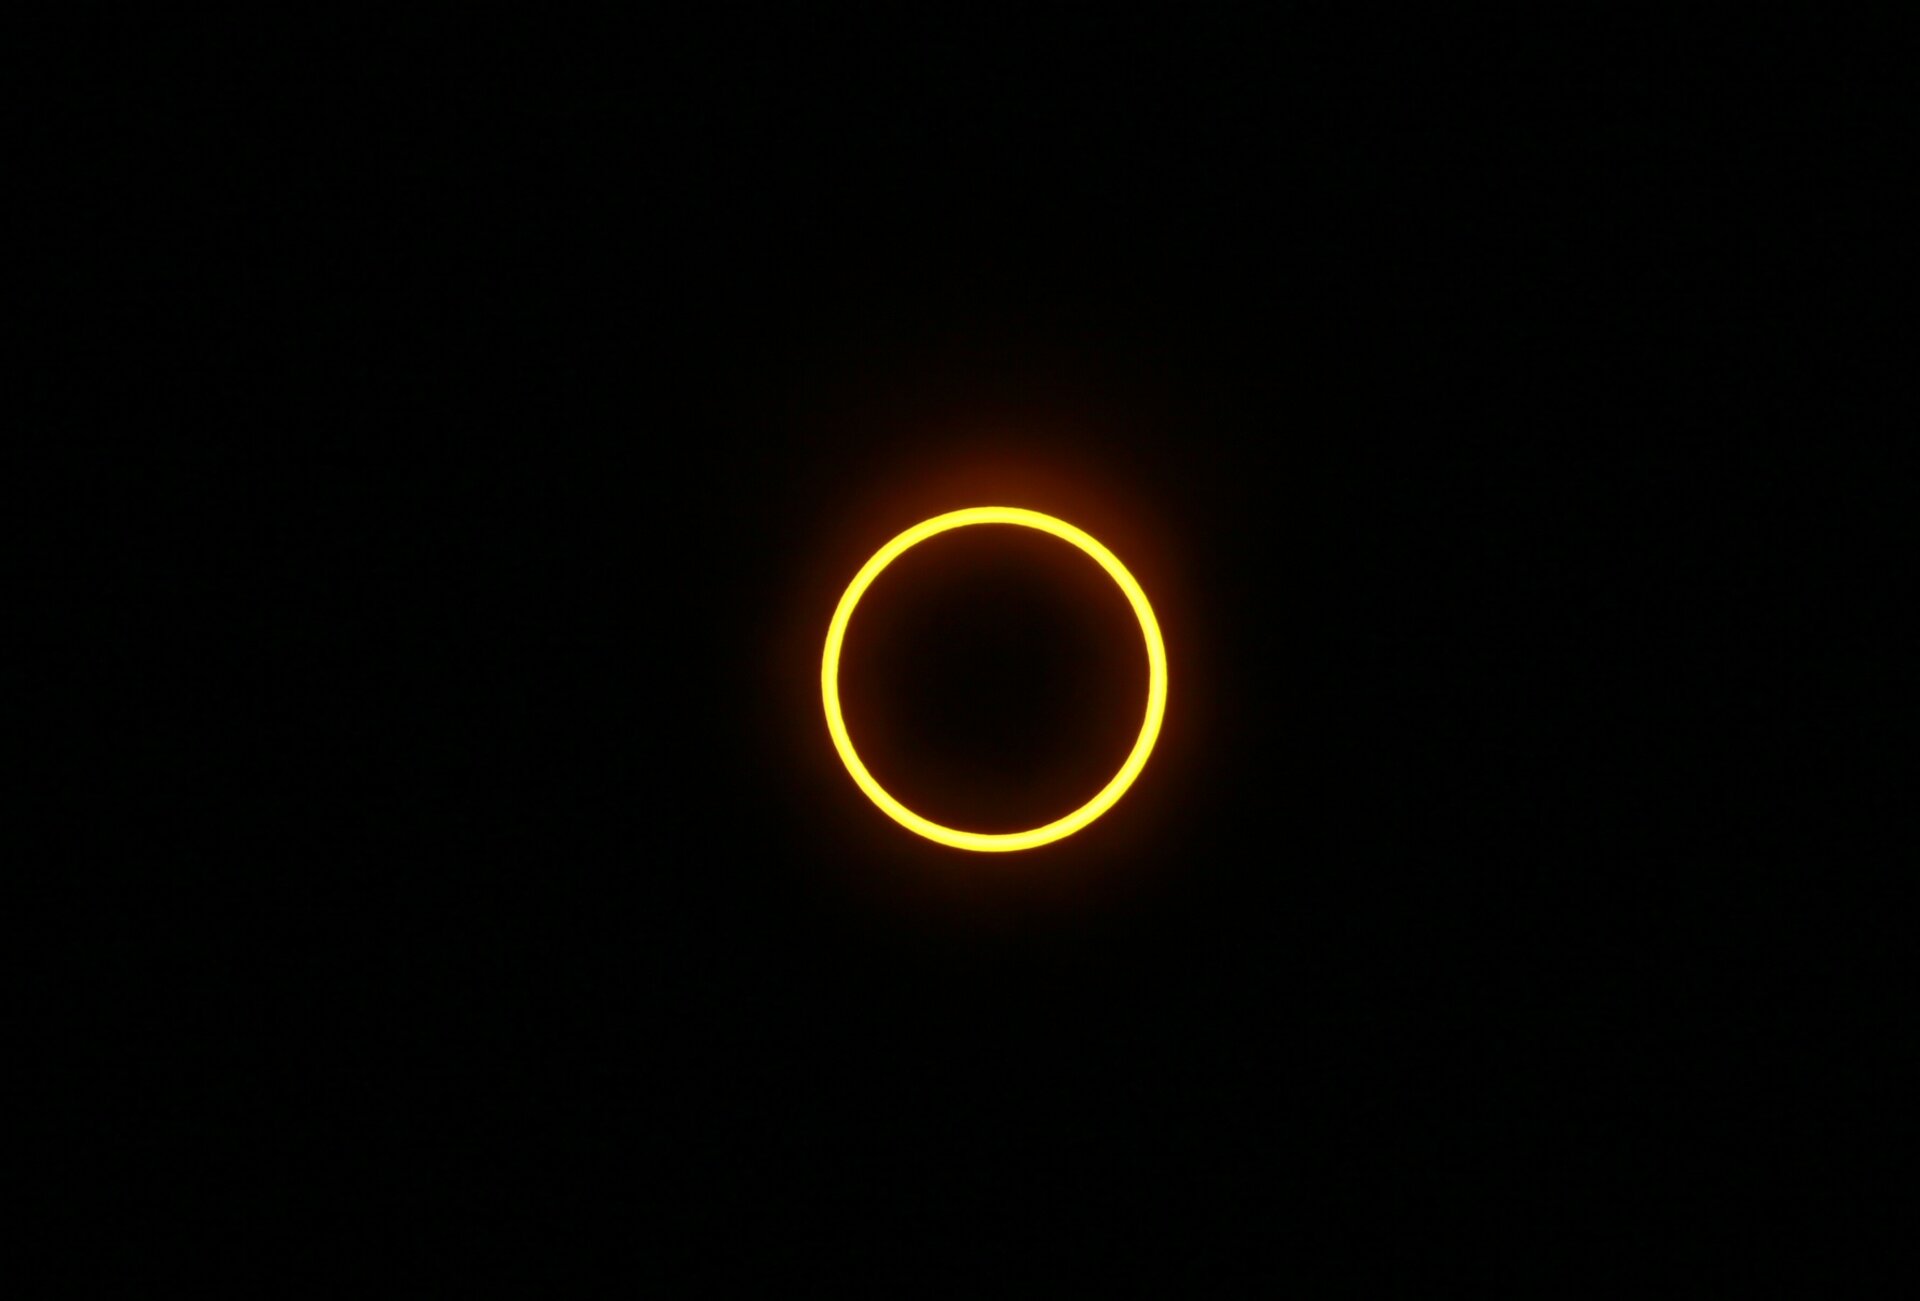 Solar Eclipse May 20, 2012 from Nevada